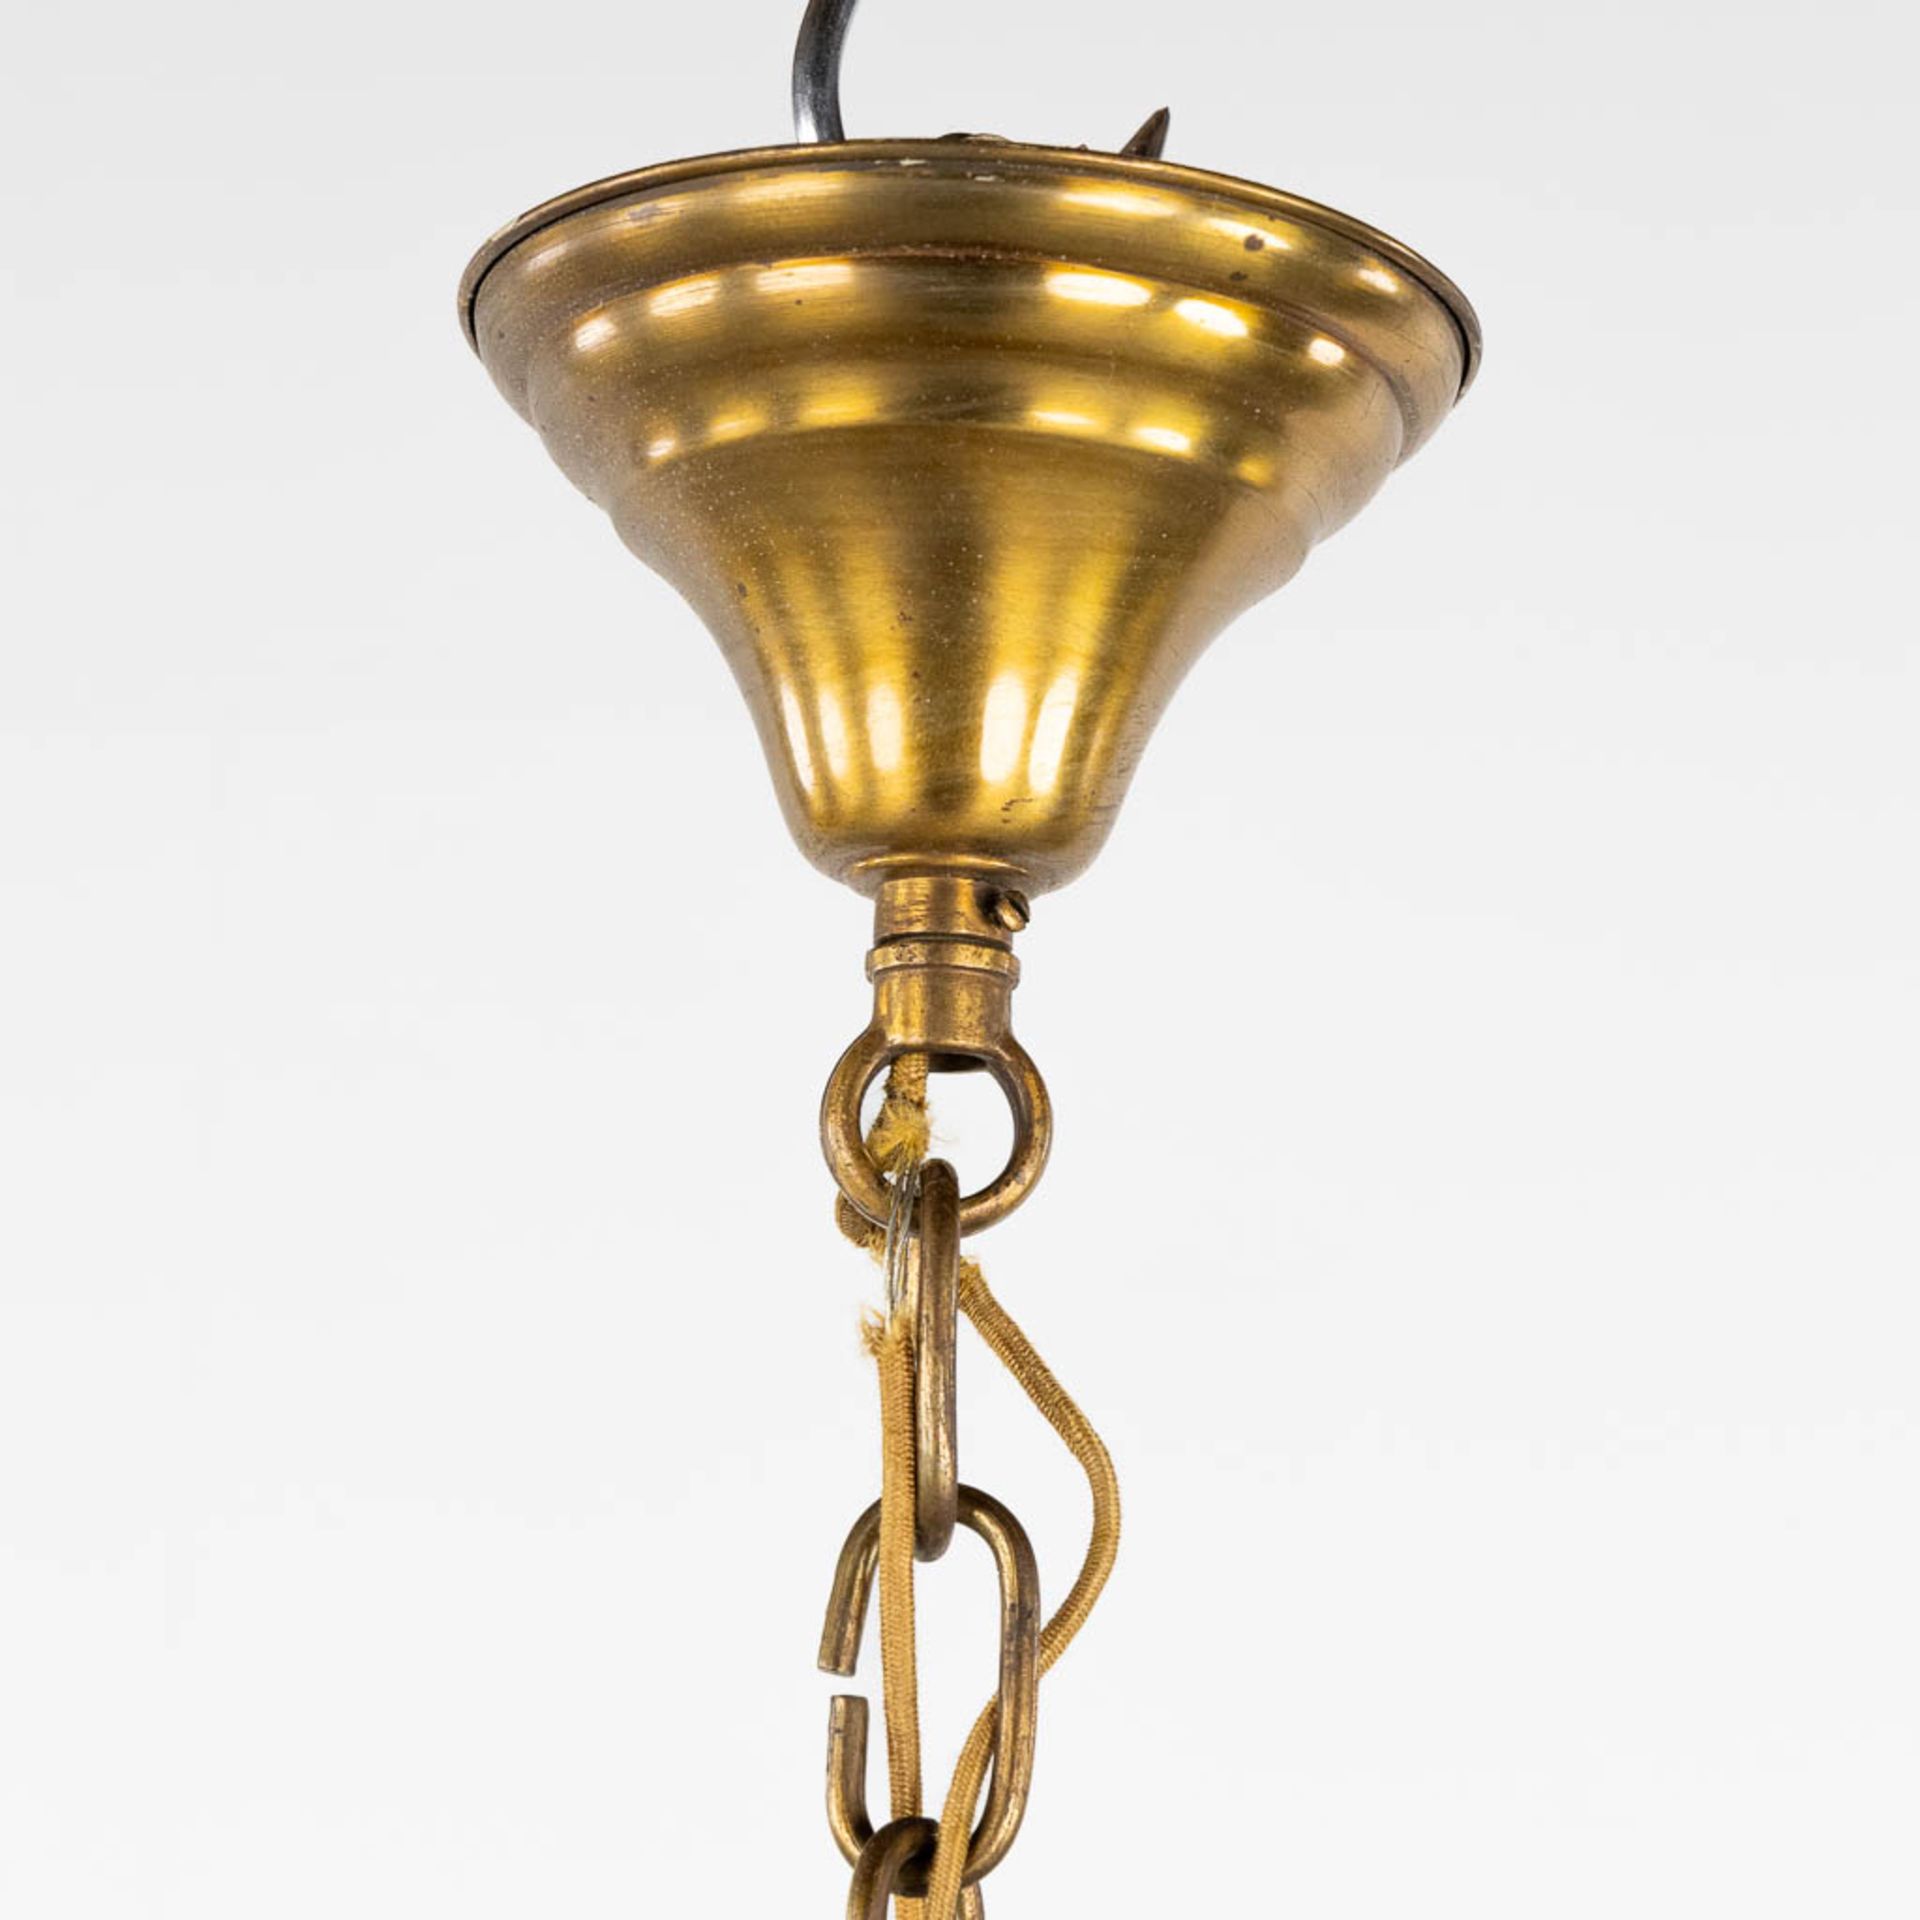 An antique chandelier, brass with coloured and white glass. Circa 1930. (H:80 x D:68 cm) - Image 3 of 11